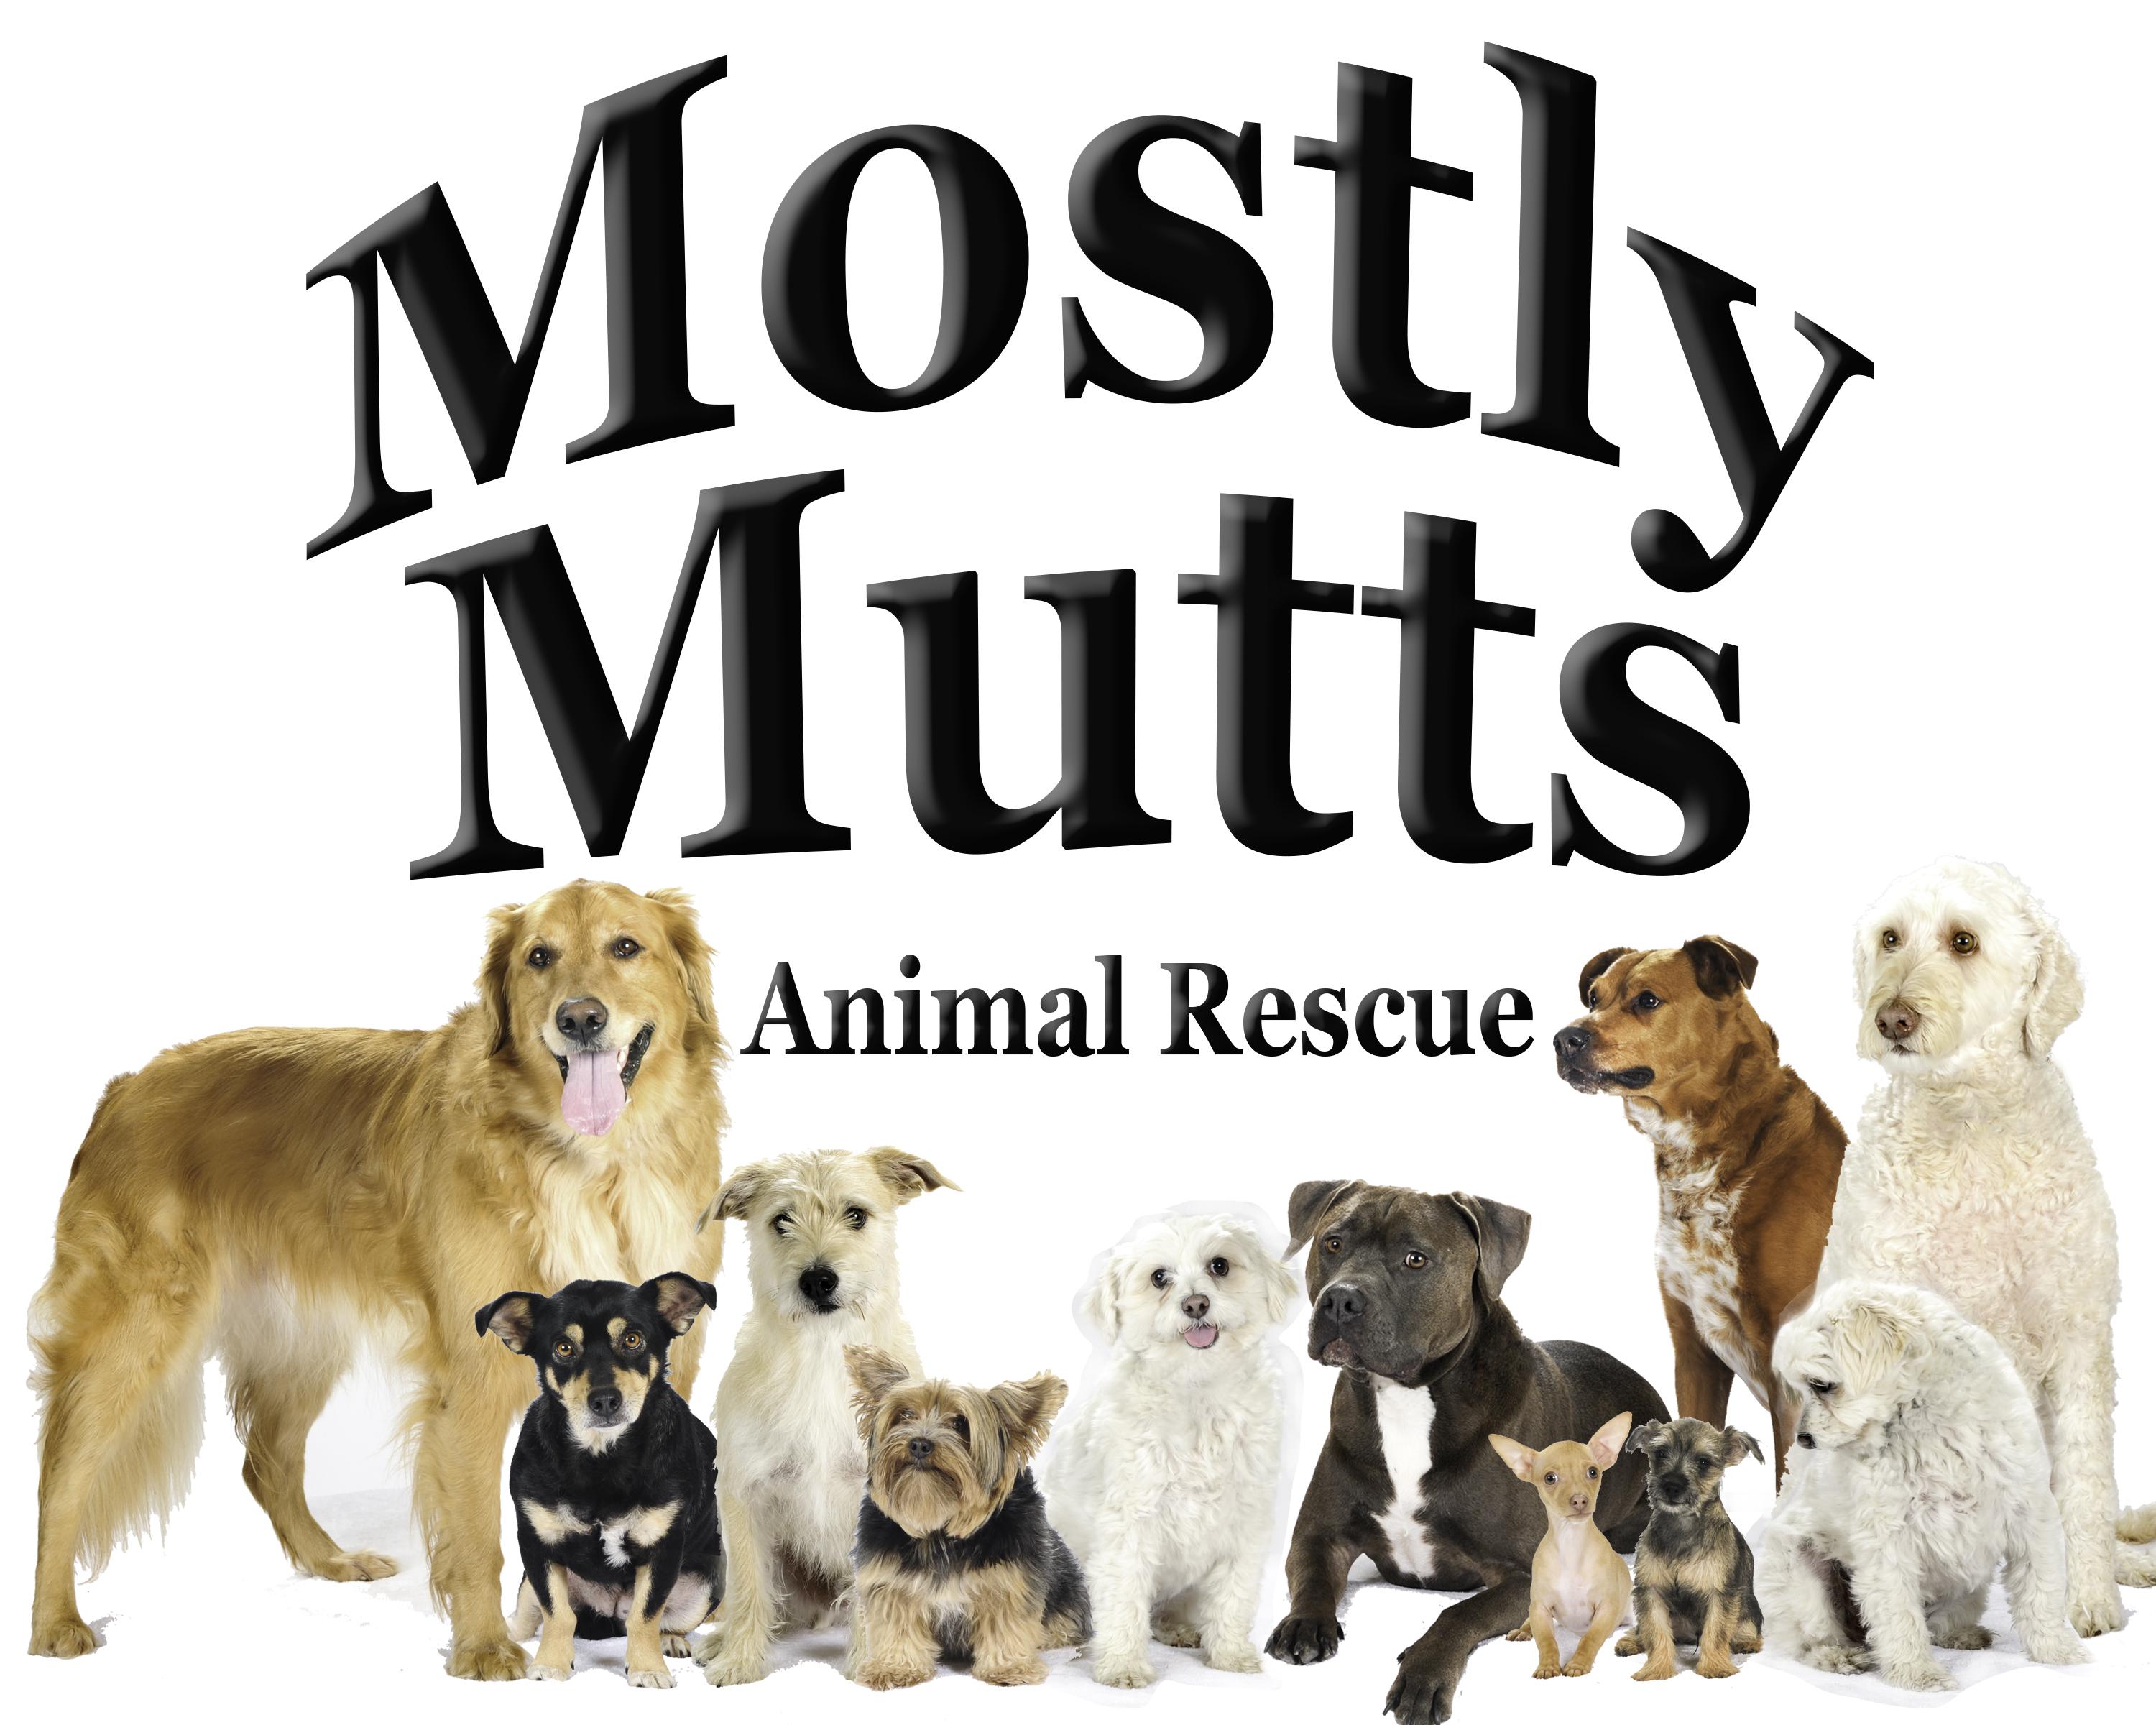 Mostly Mutts Animal Rescue